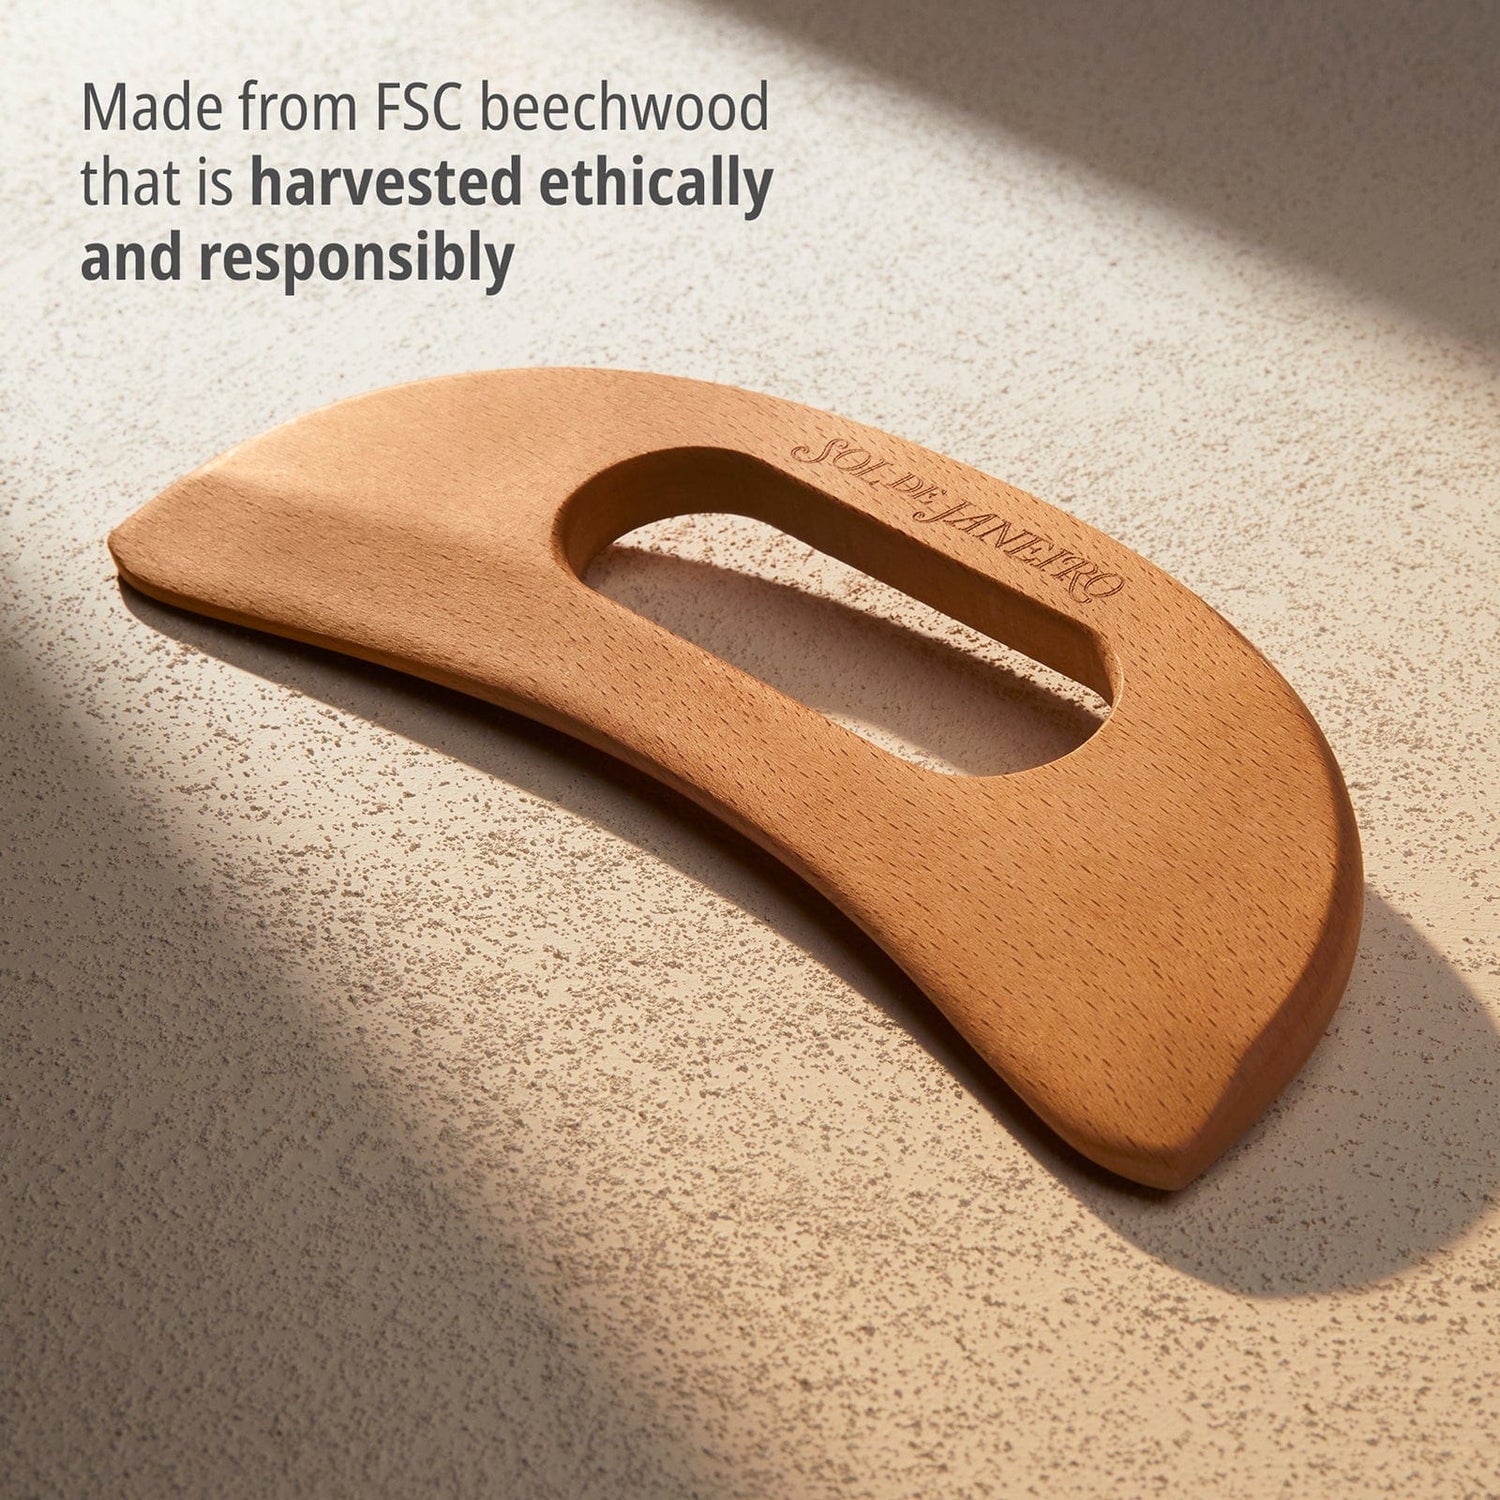 Made from FSC beechwood that is harvested ethically and responsibly